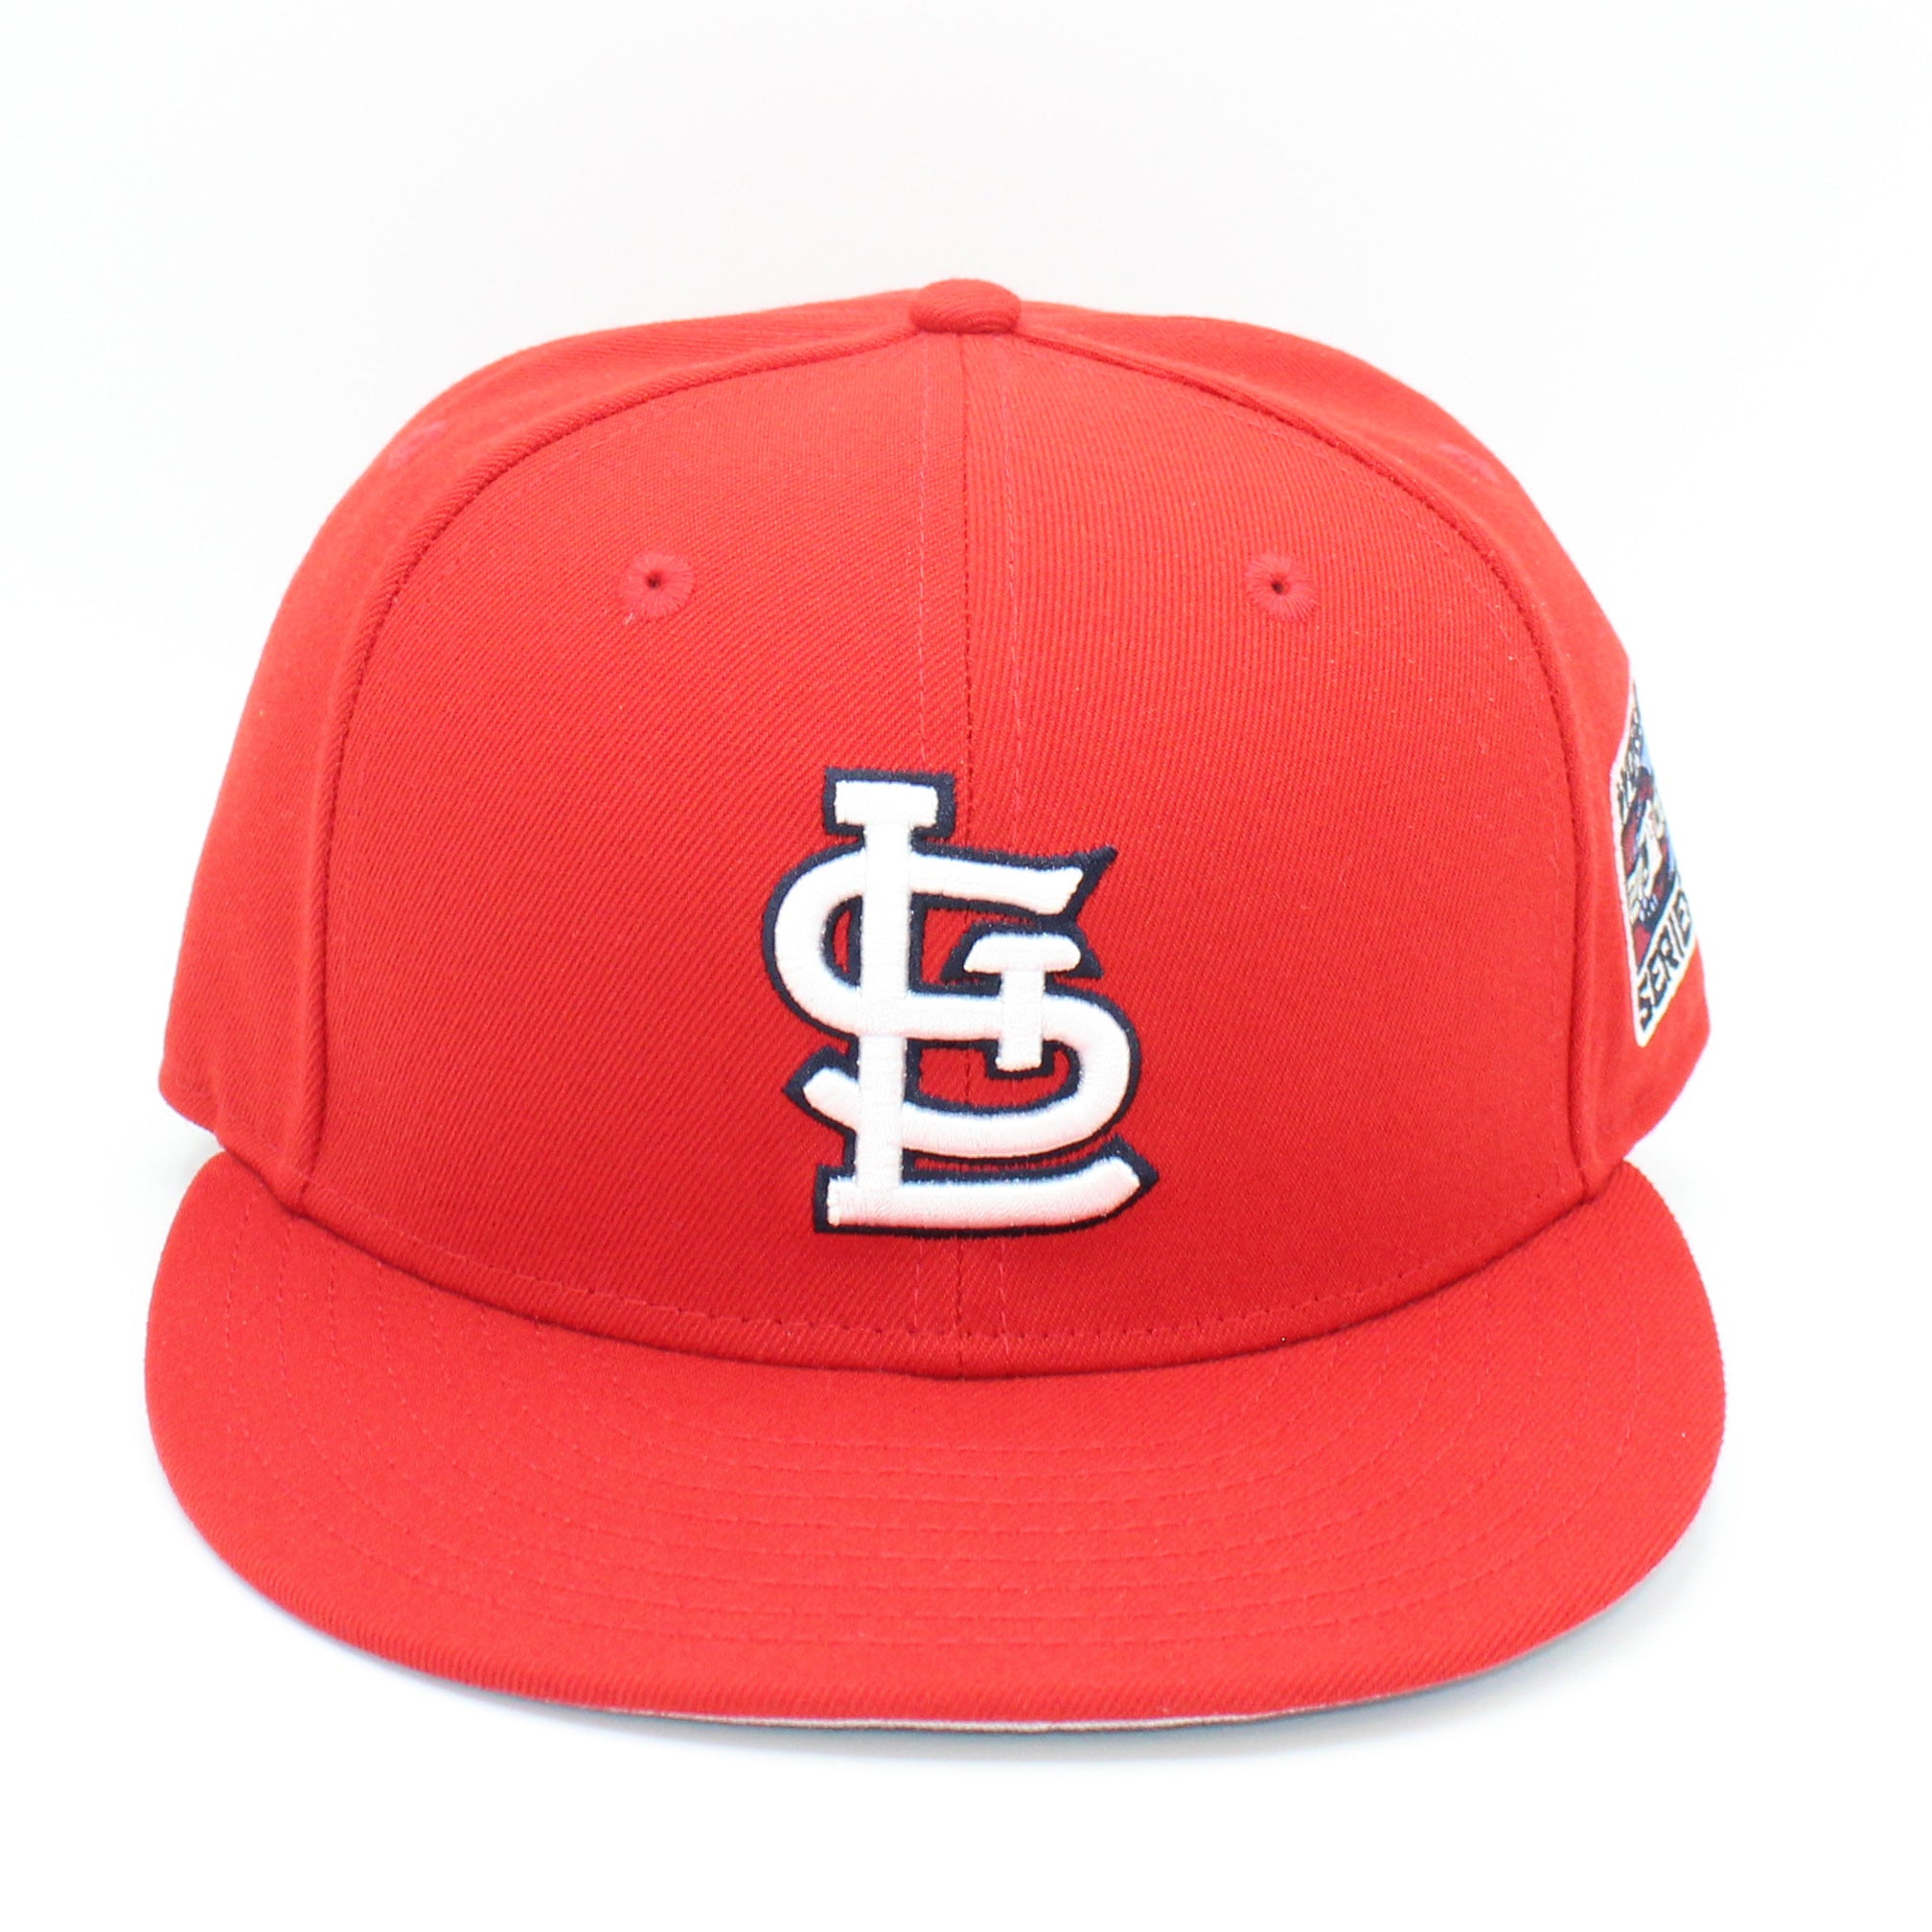 Fitted hats, Mlb apparel, Cardinals